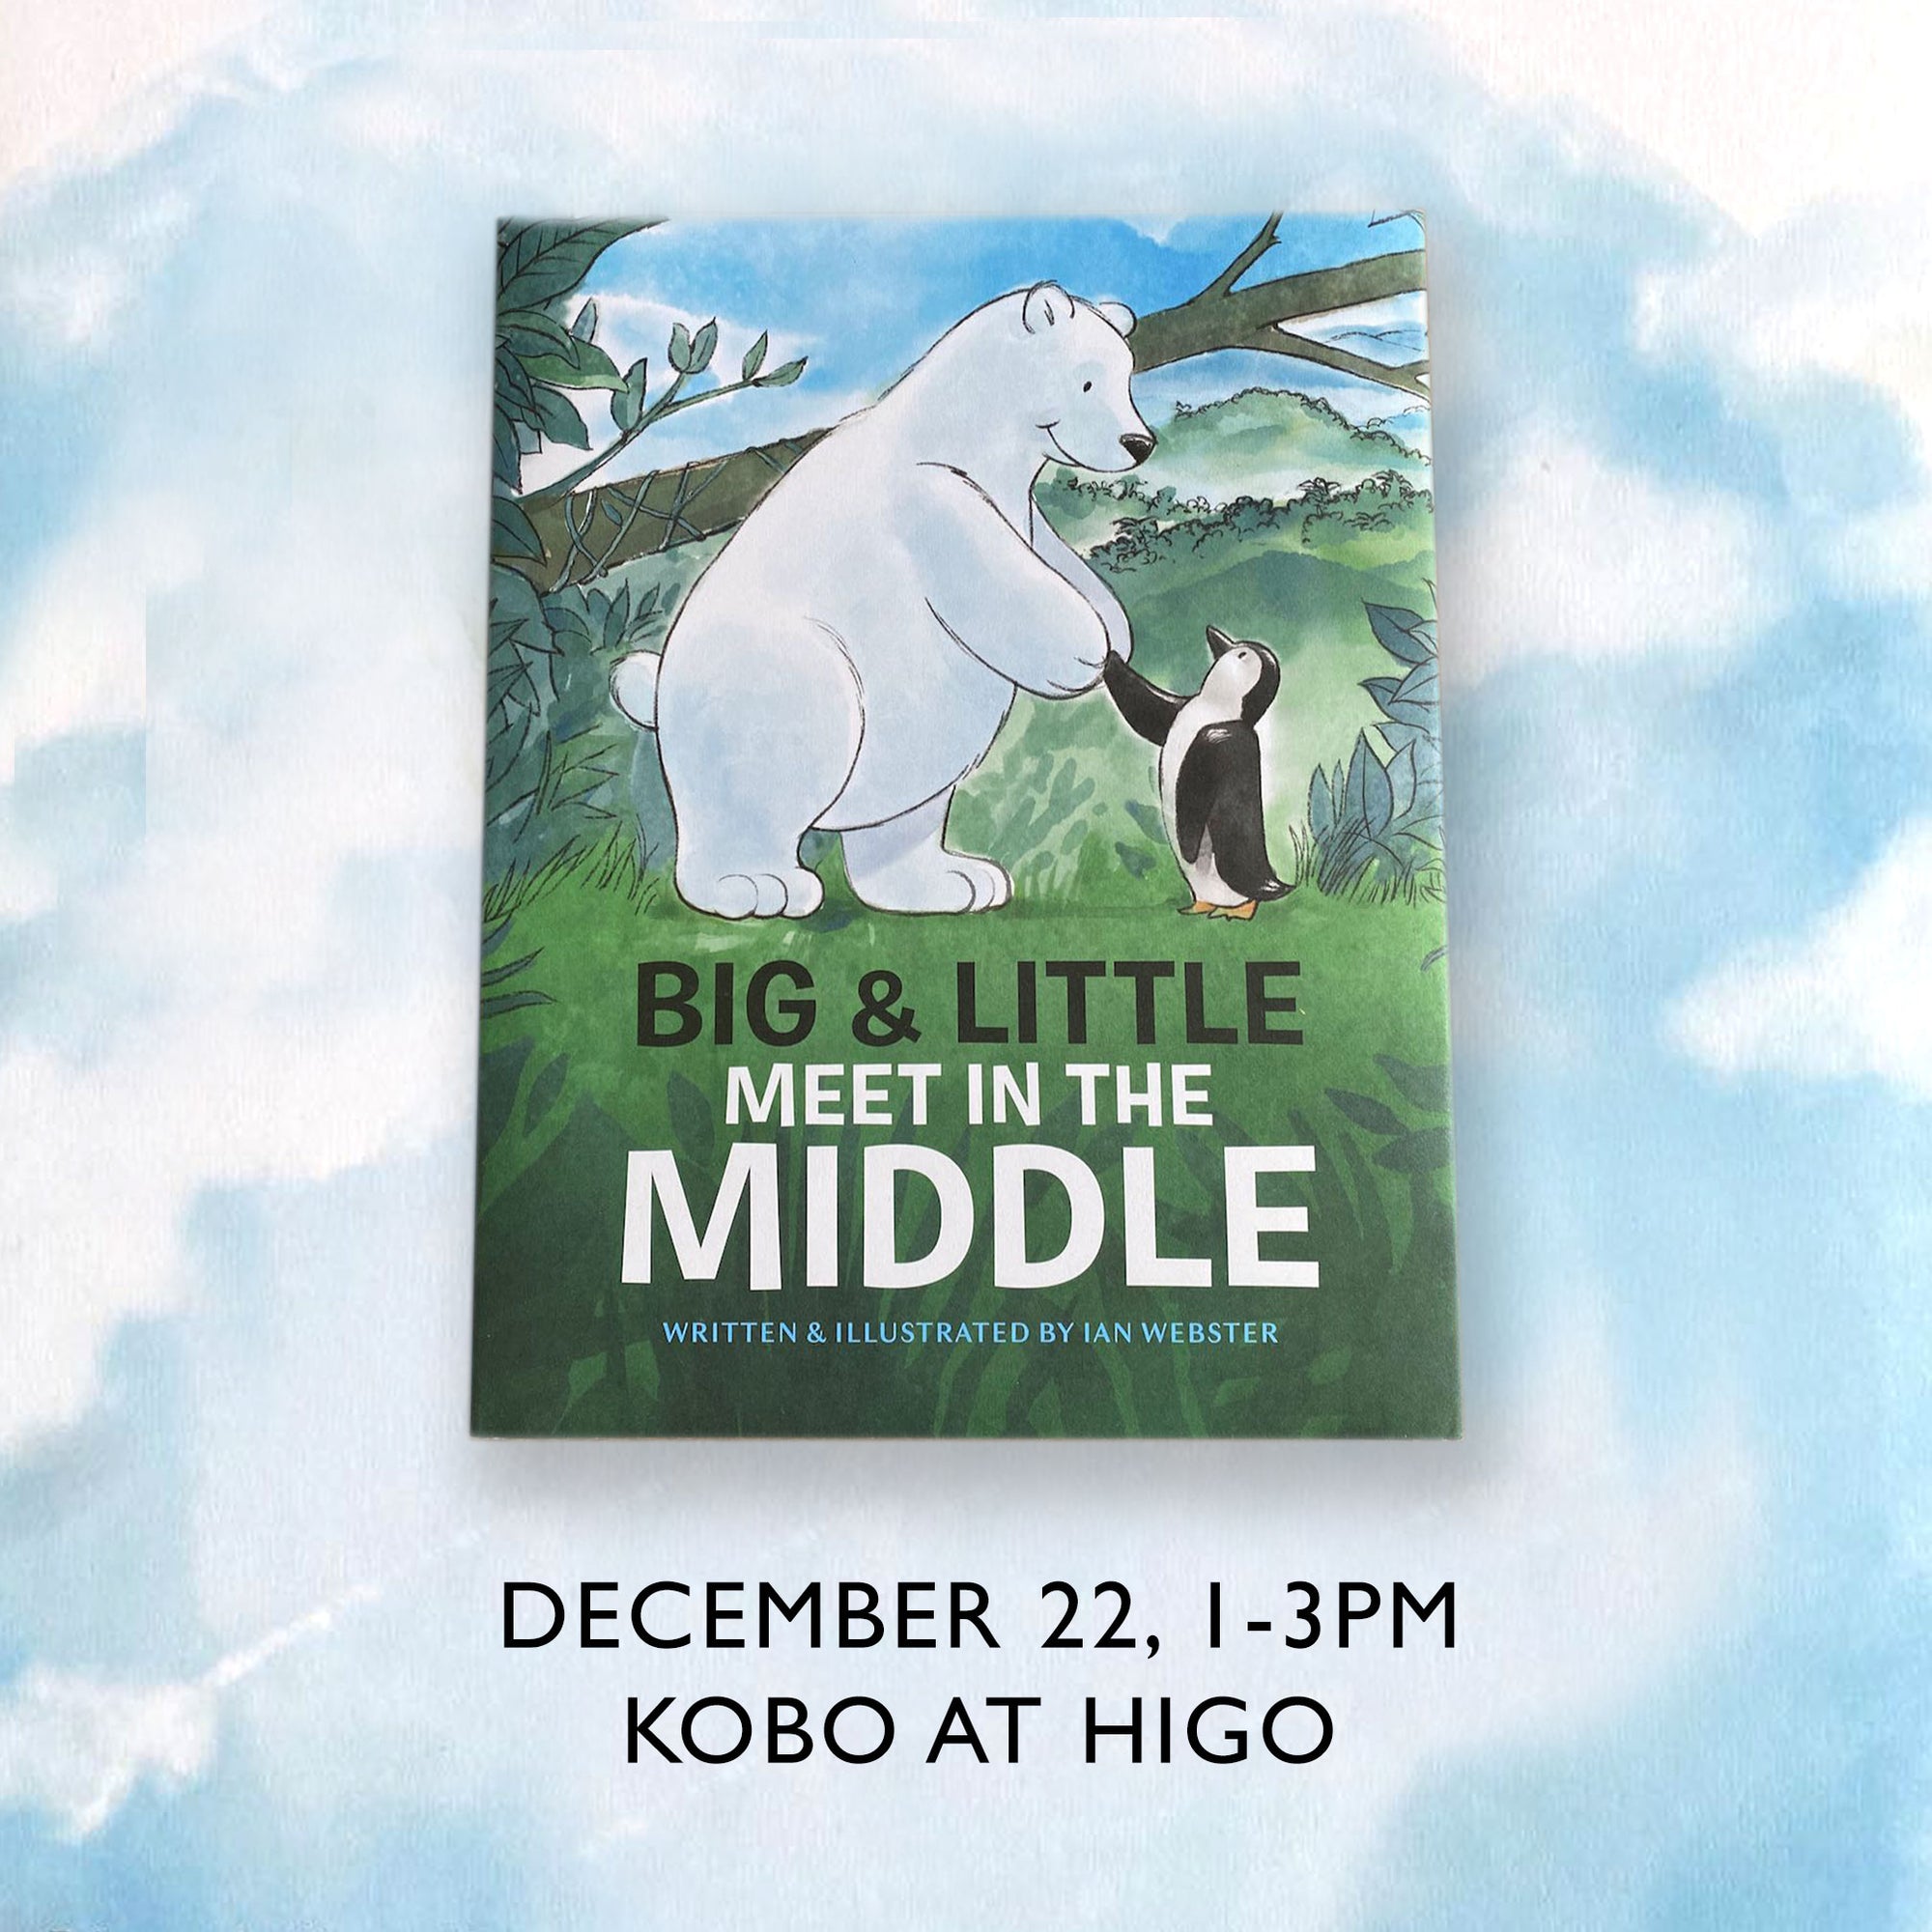 Big and Little Meet in the Middle Book Signing, Dec. 22nd